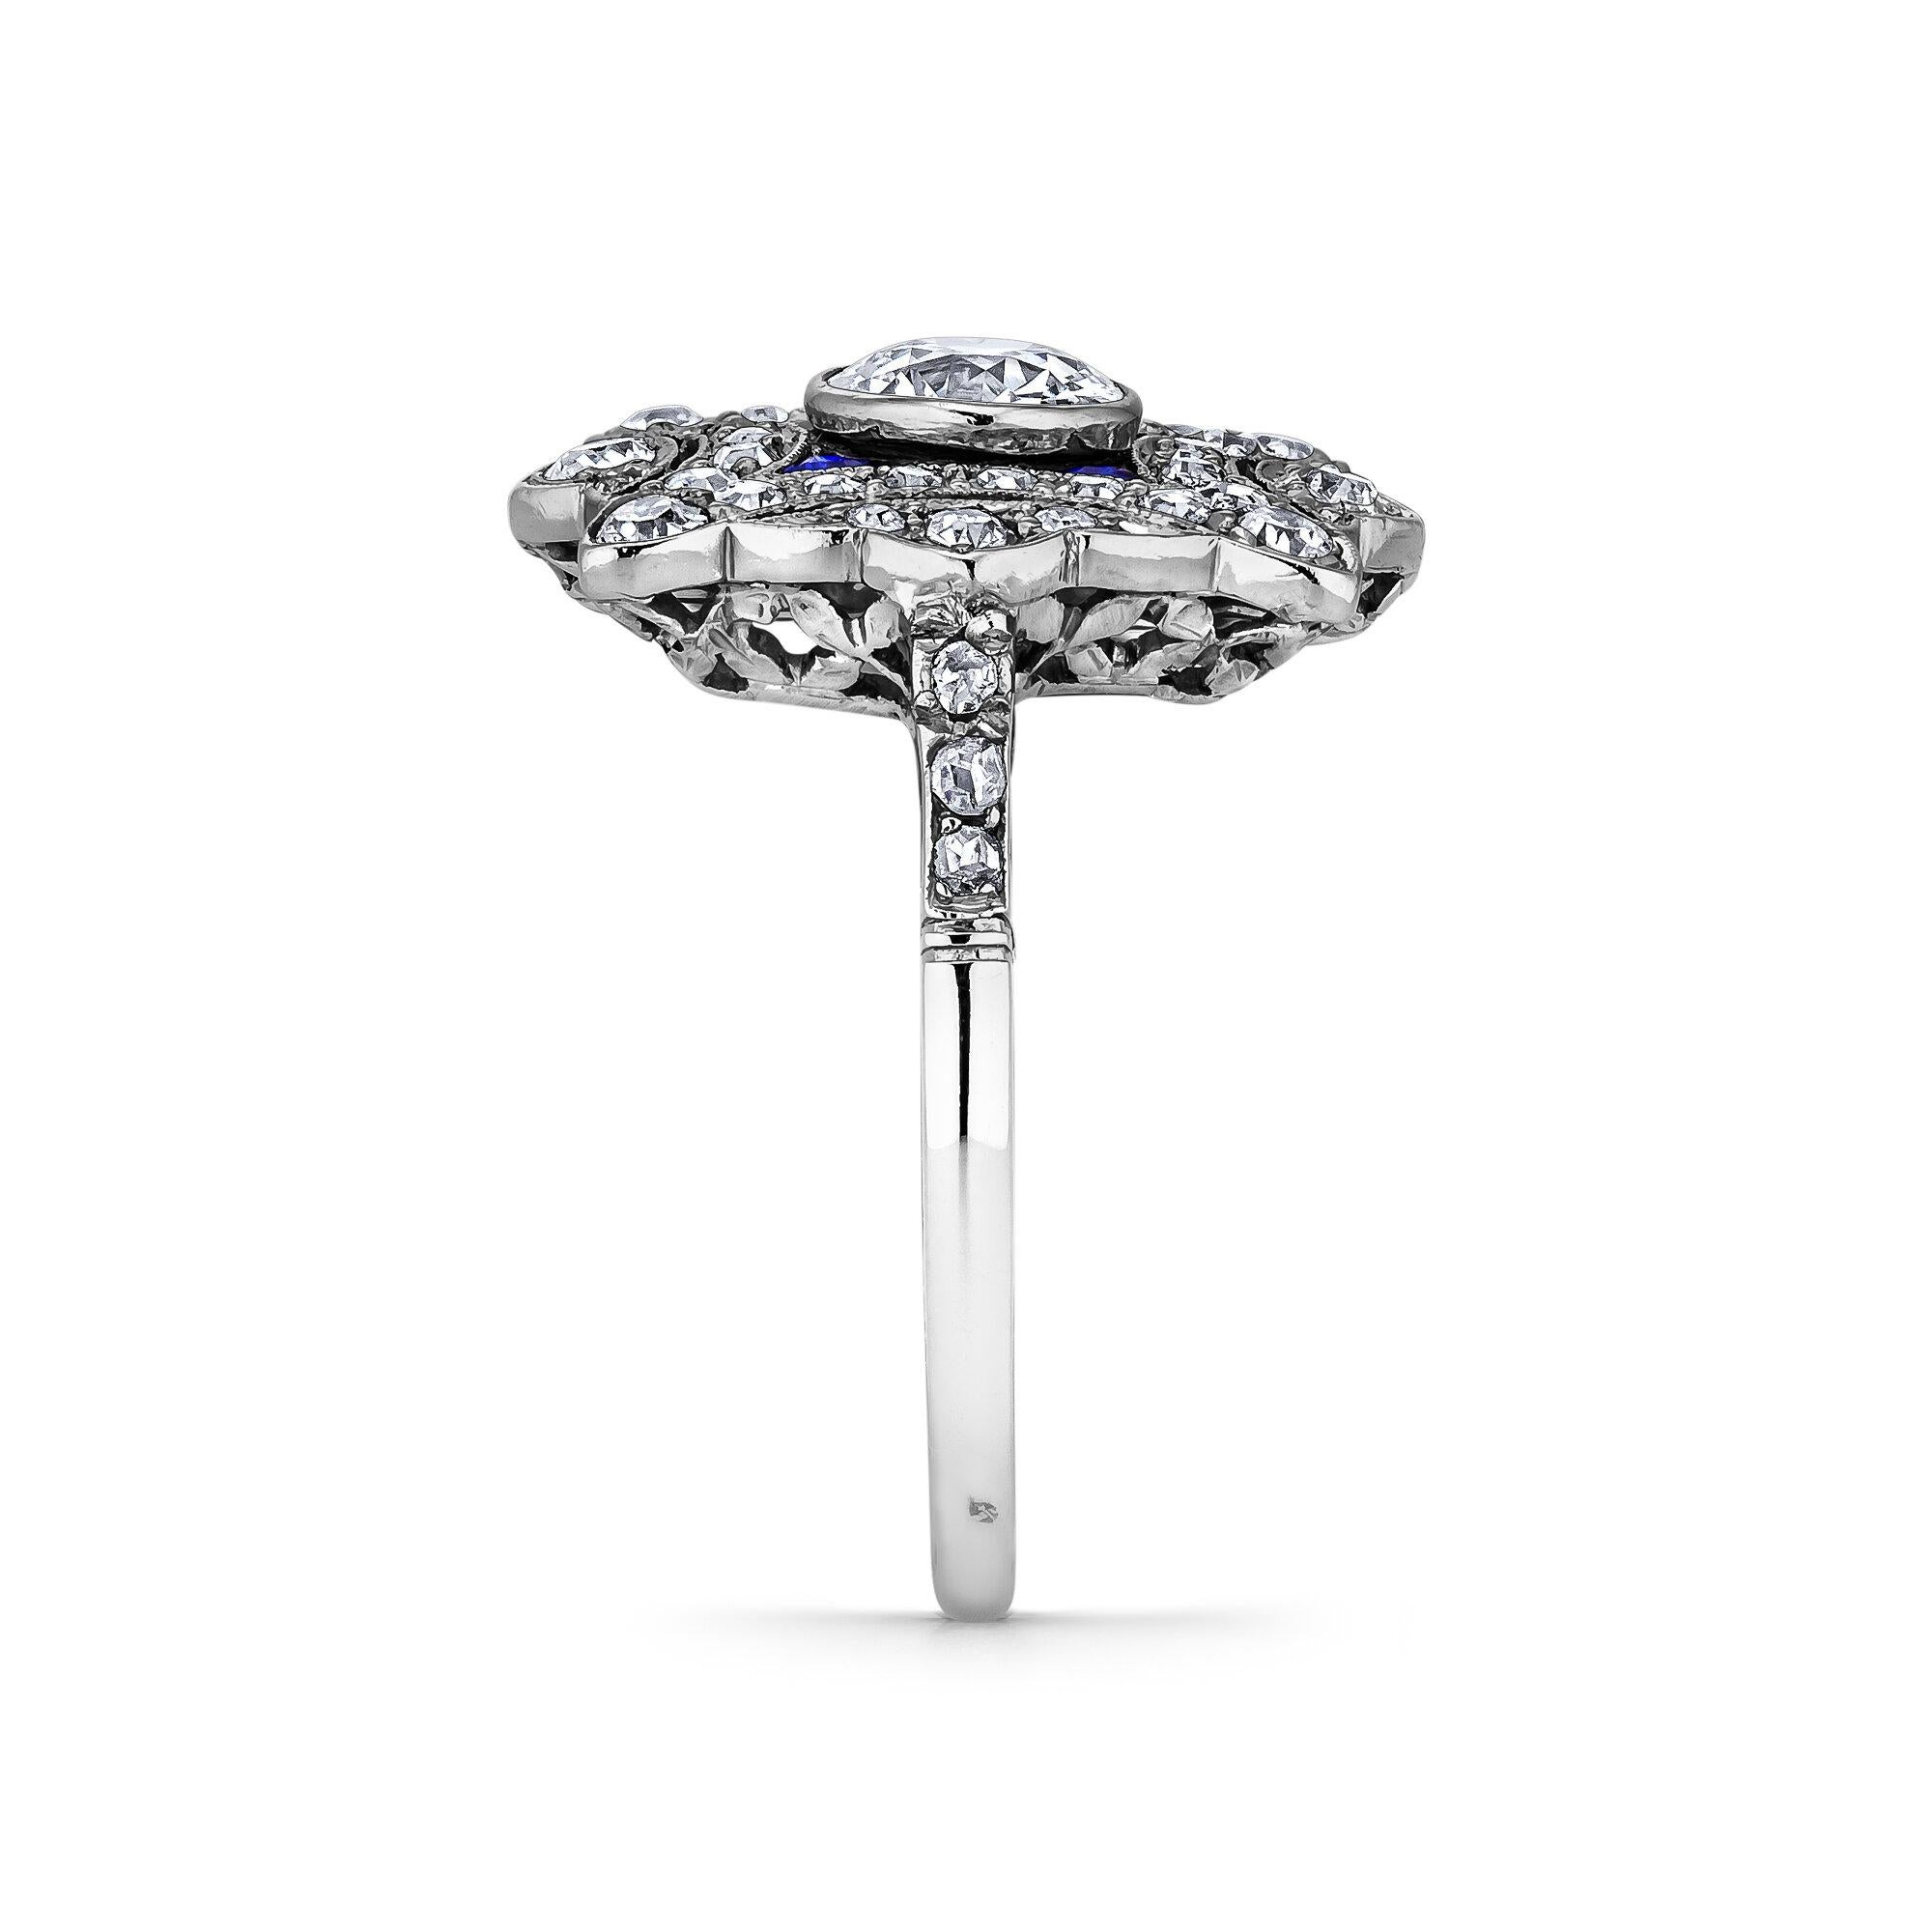 Wear it as an engagement ring, a pinkie ring, or an everyday accessory but always wear it with panache.  This French Art Deco, Circa 1930, diamond and sapphire platinum plaque ring can be worn as you see fit but will always be the statement piece in